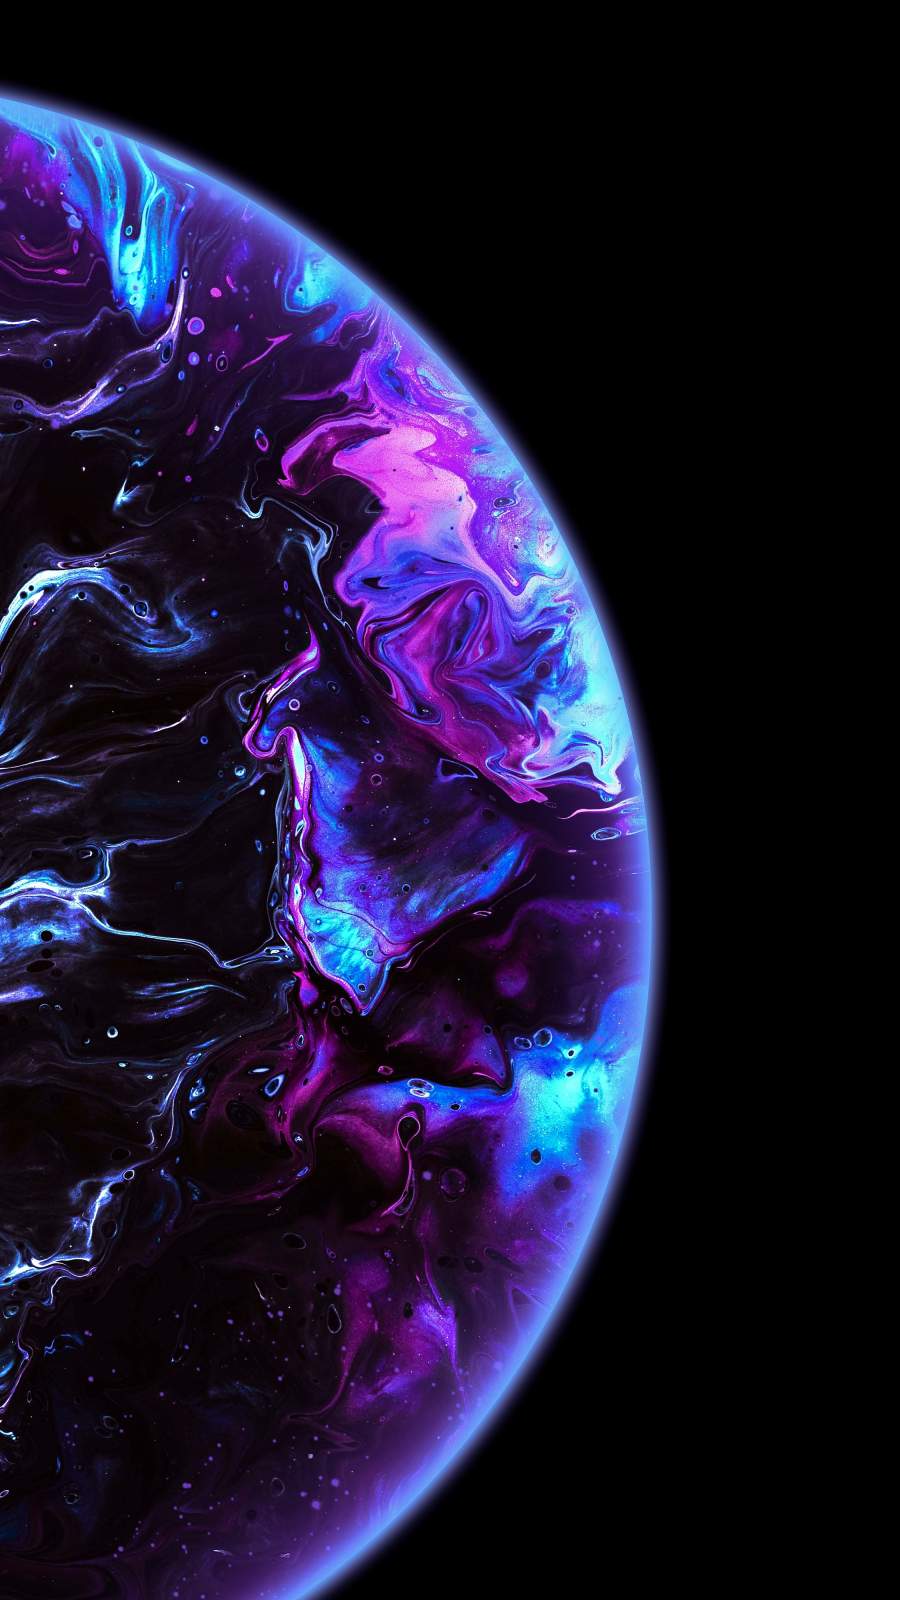 Sphere Marble Planet IPhone 11 Pro Max Wallpaper